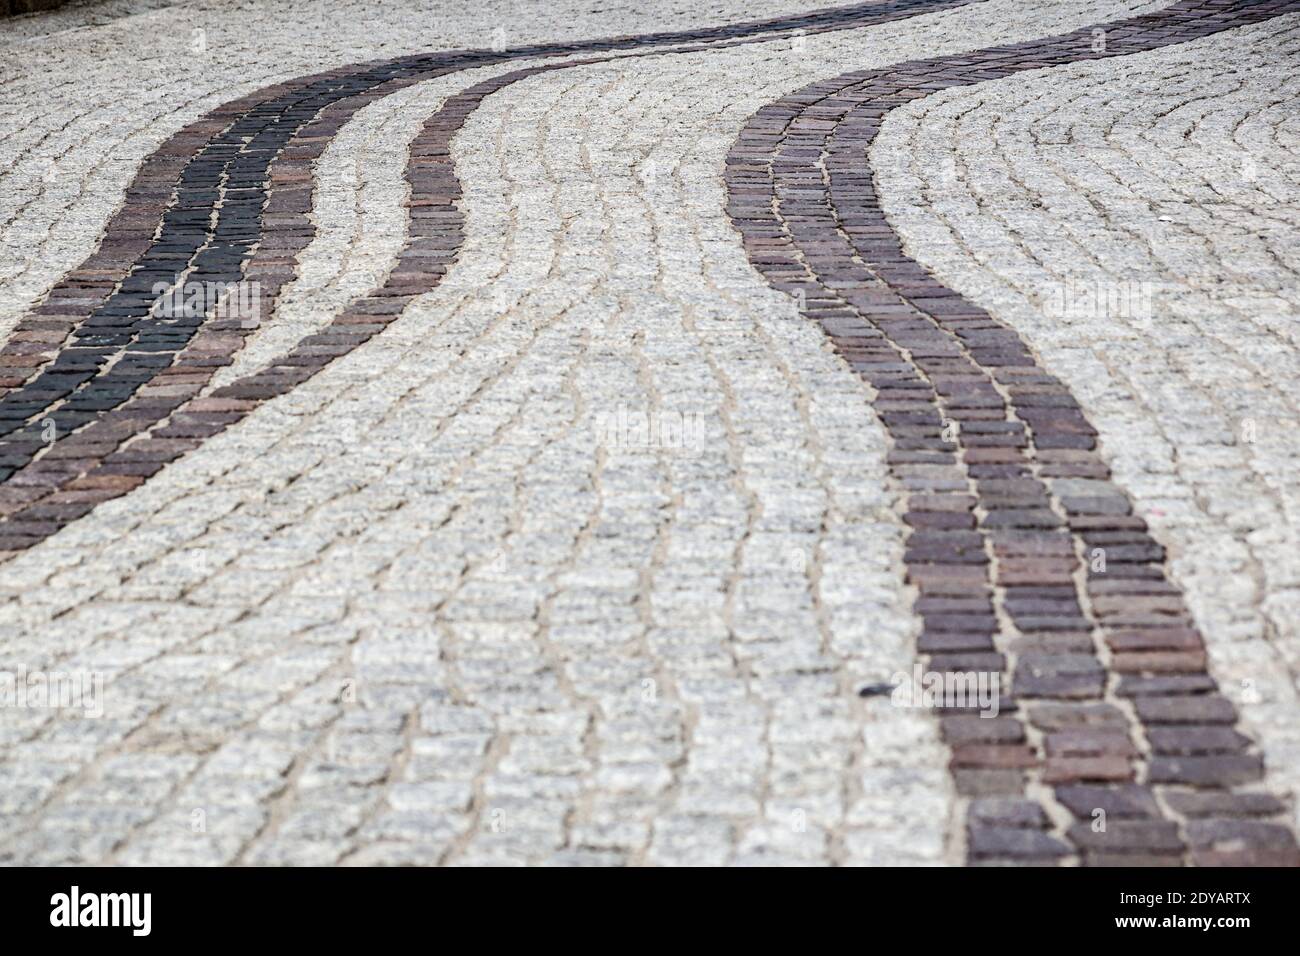 Background image of old cobblestone road backlit with low sunlight. Stone texture close up. Small pebbles on the road. Stone path Stock Photo